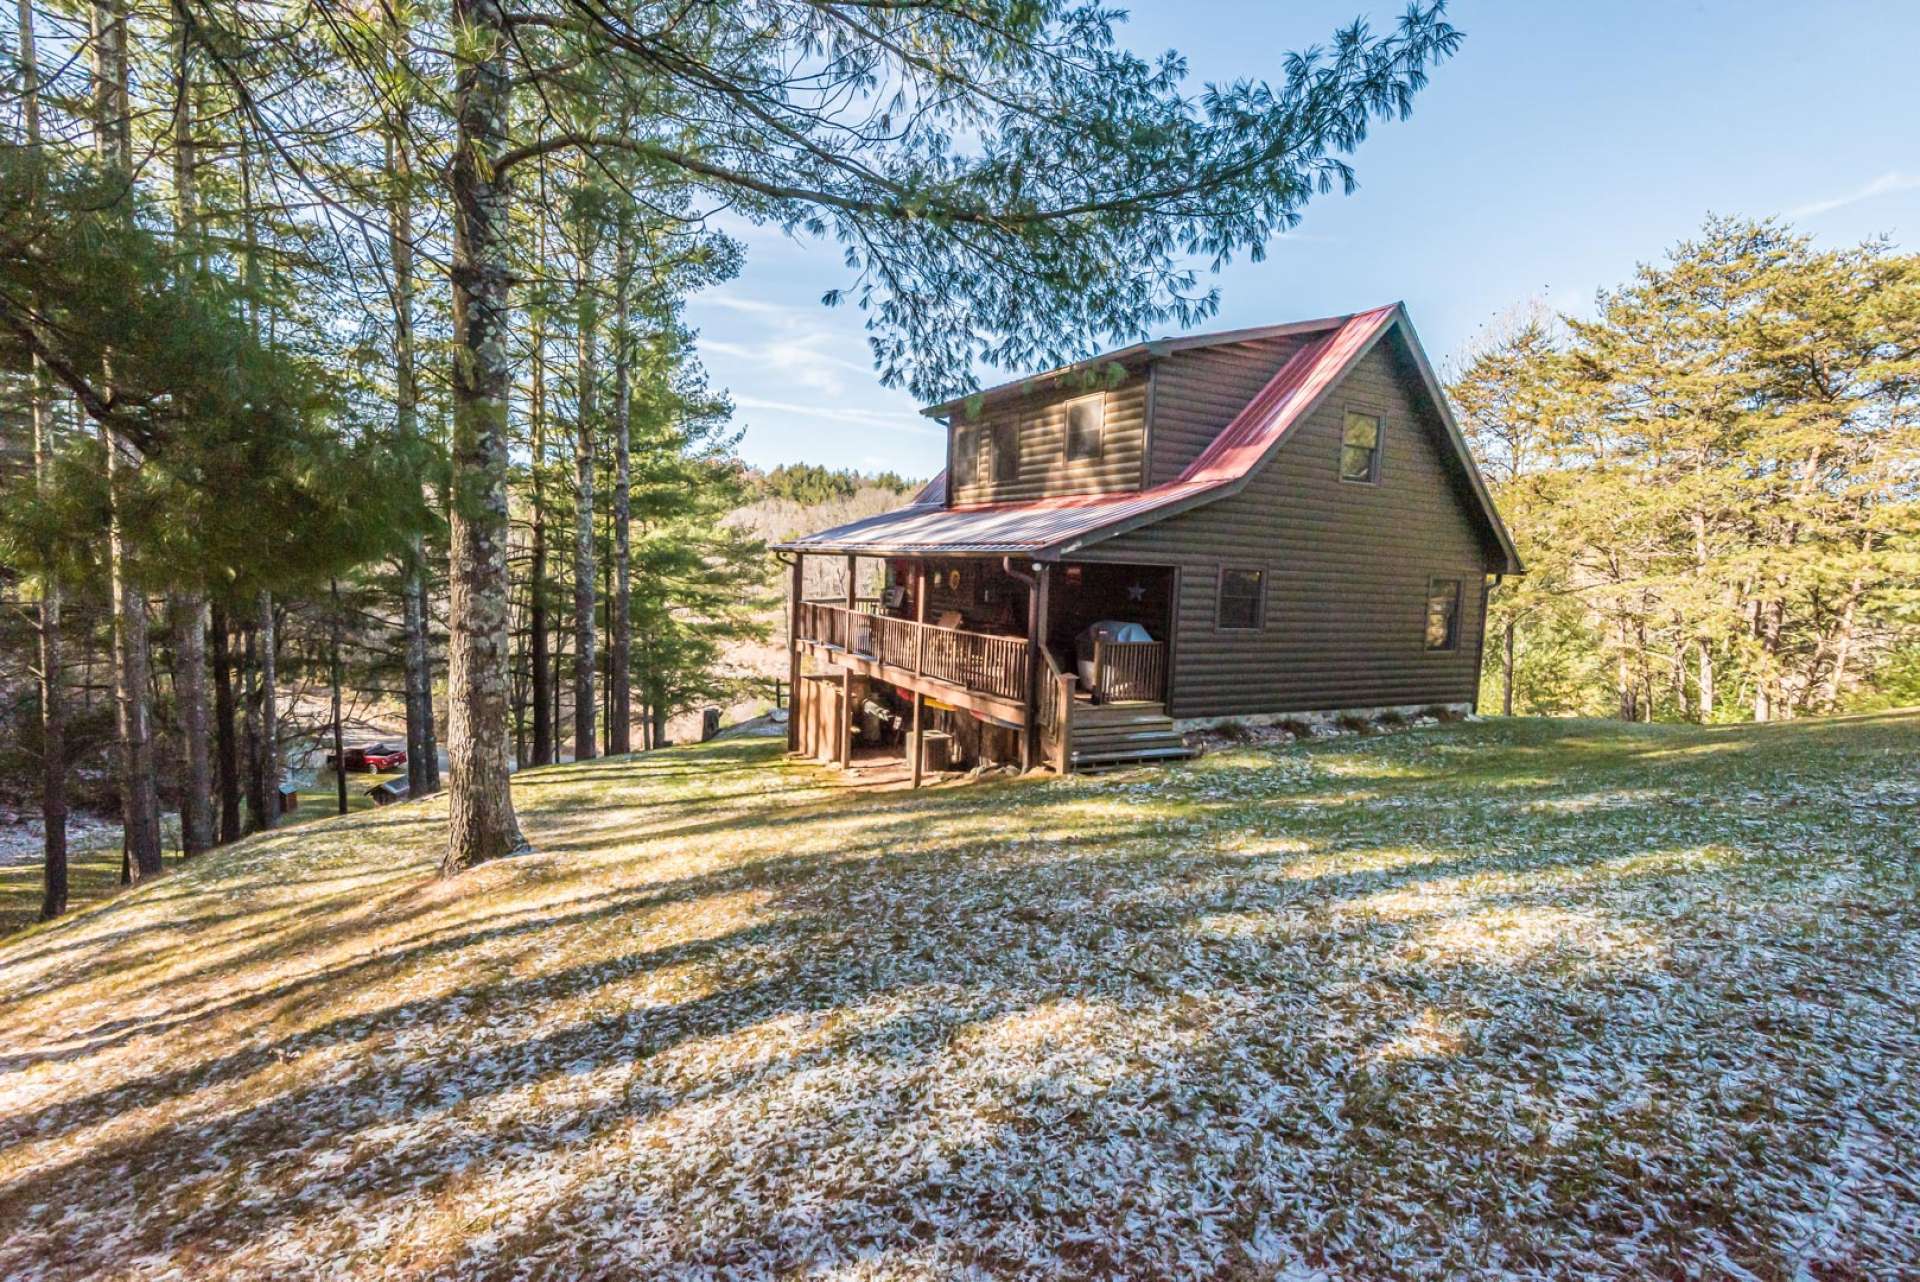 Private Mountain Retreat! This 3-bedroom, 3-bath log cabin is nestled on a peaceful 2+ acre setting in the beautifully maintained gated community of Prime Mountain Estates, in the Piney Creek area of Alleghany County in the North Carolina High Country.